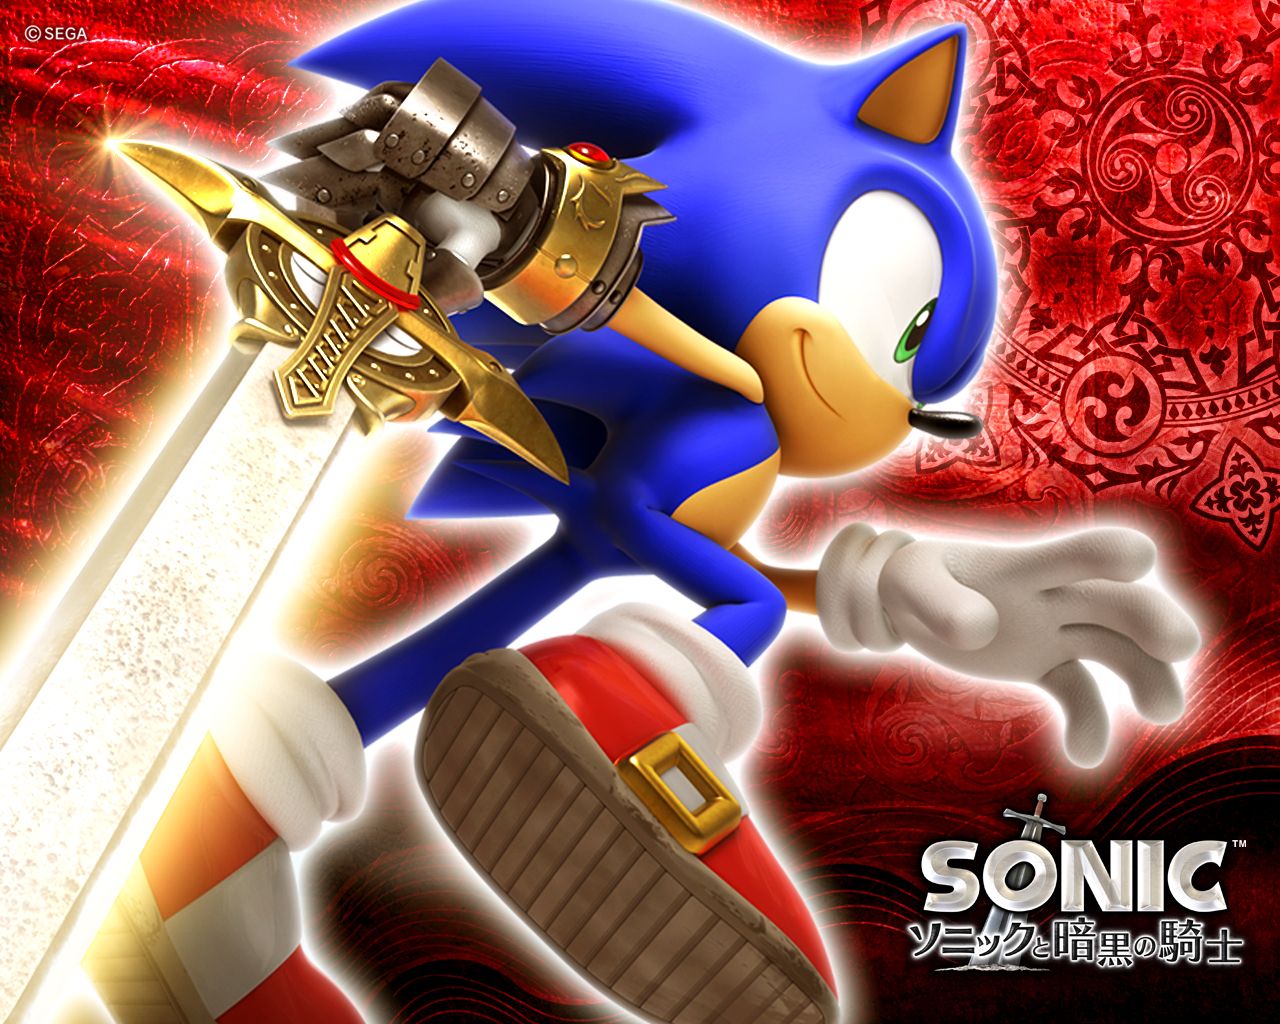 Sonic And The Black Knight wallpaper, Video Game, HQ Sonic And The Black Knight pictureK Wallpaper 2019